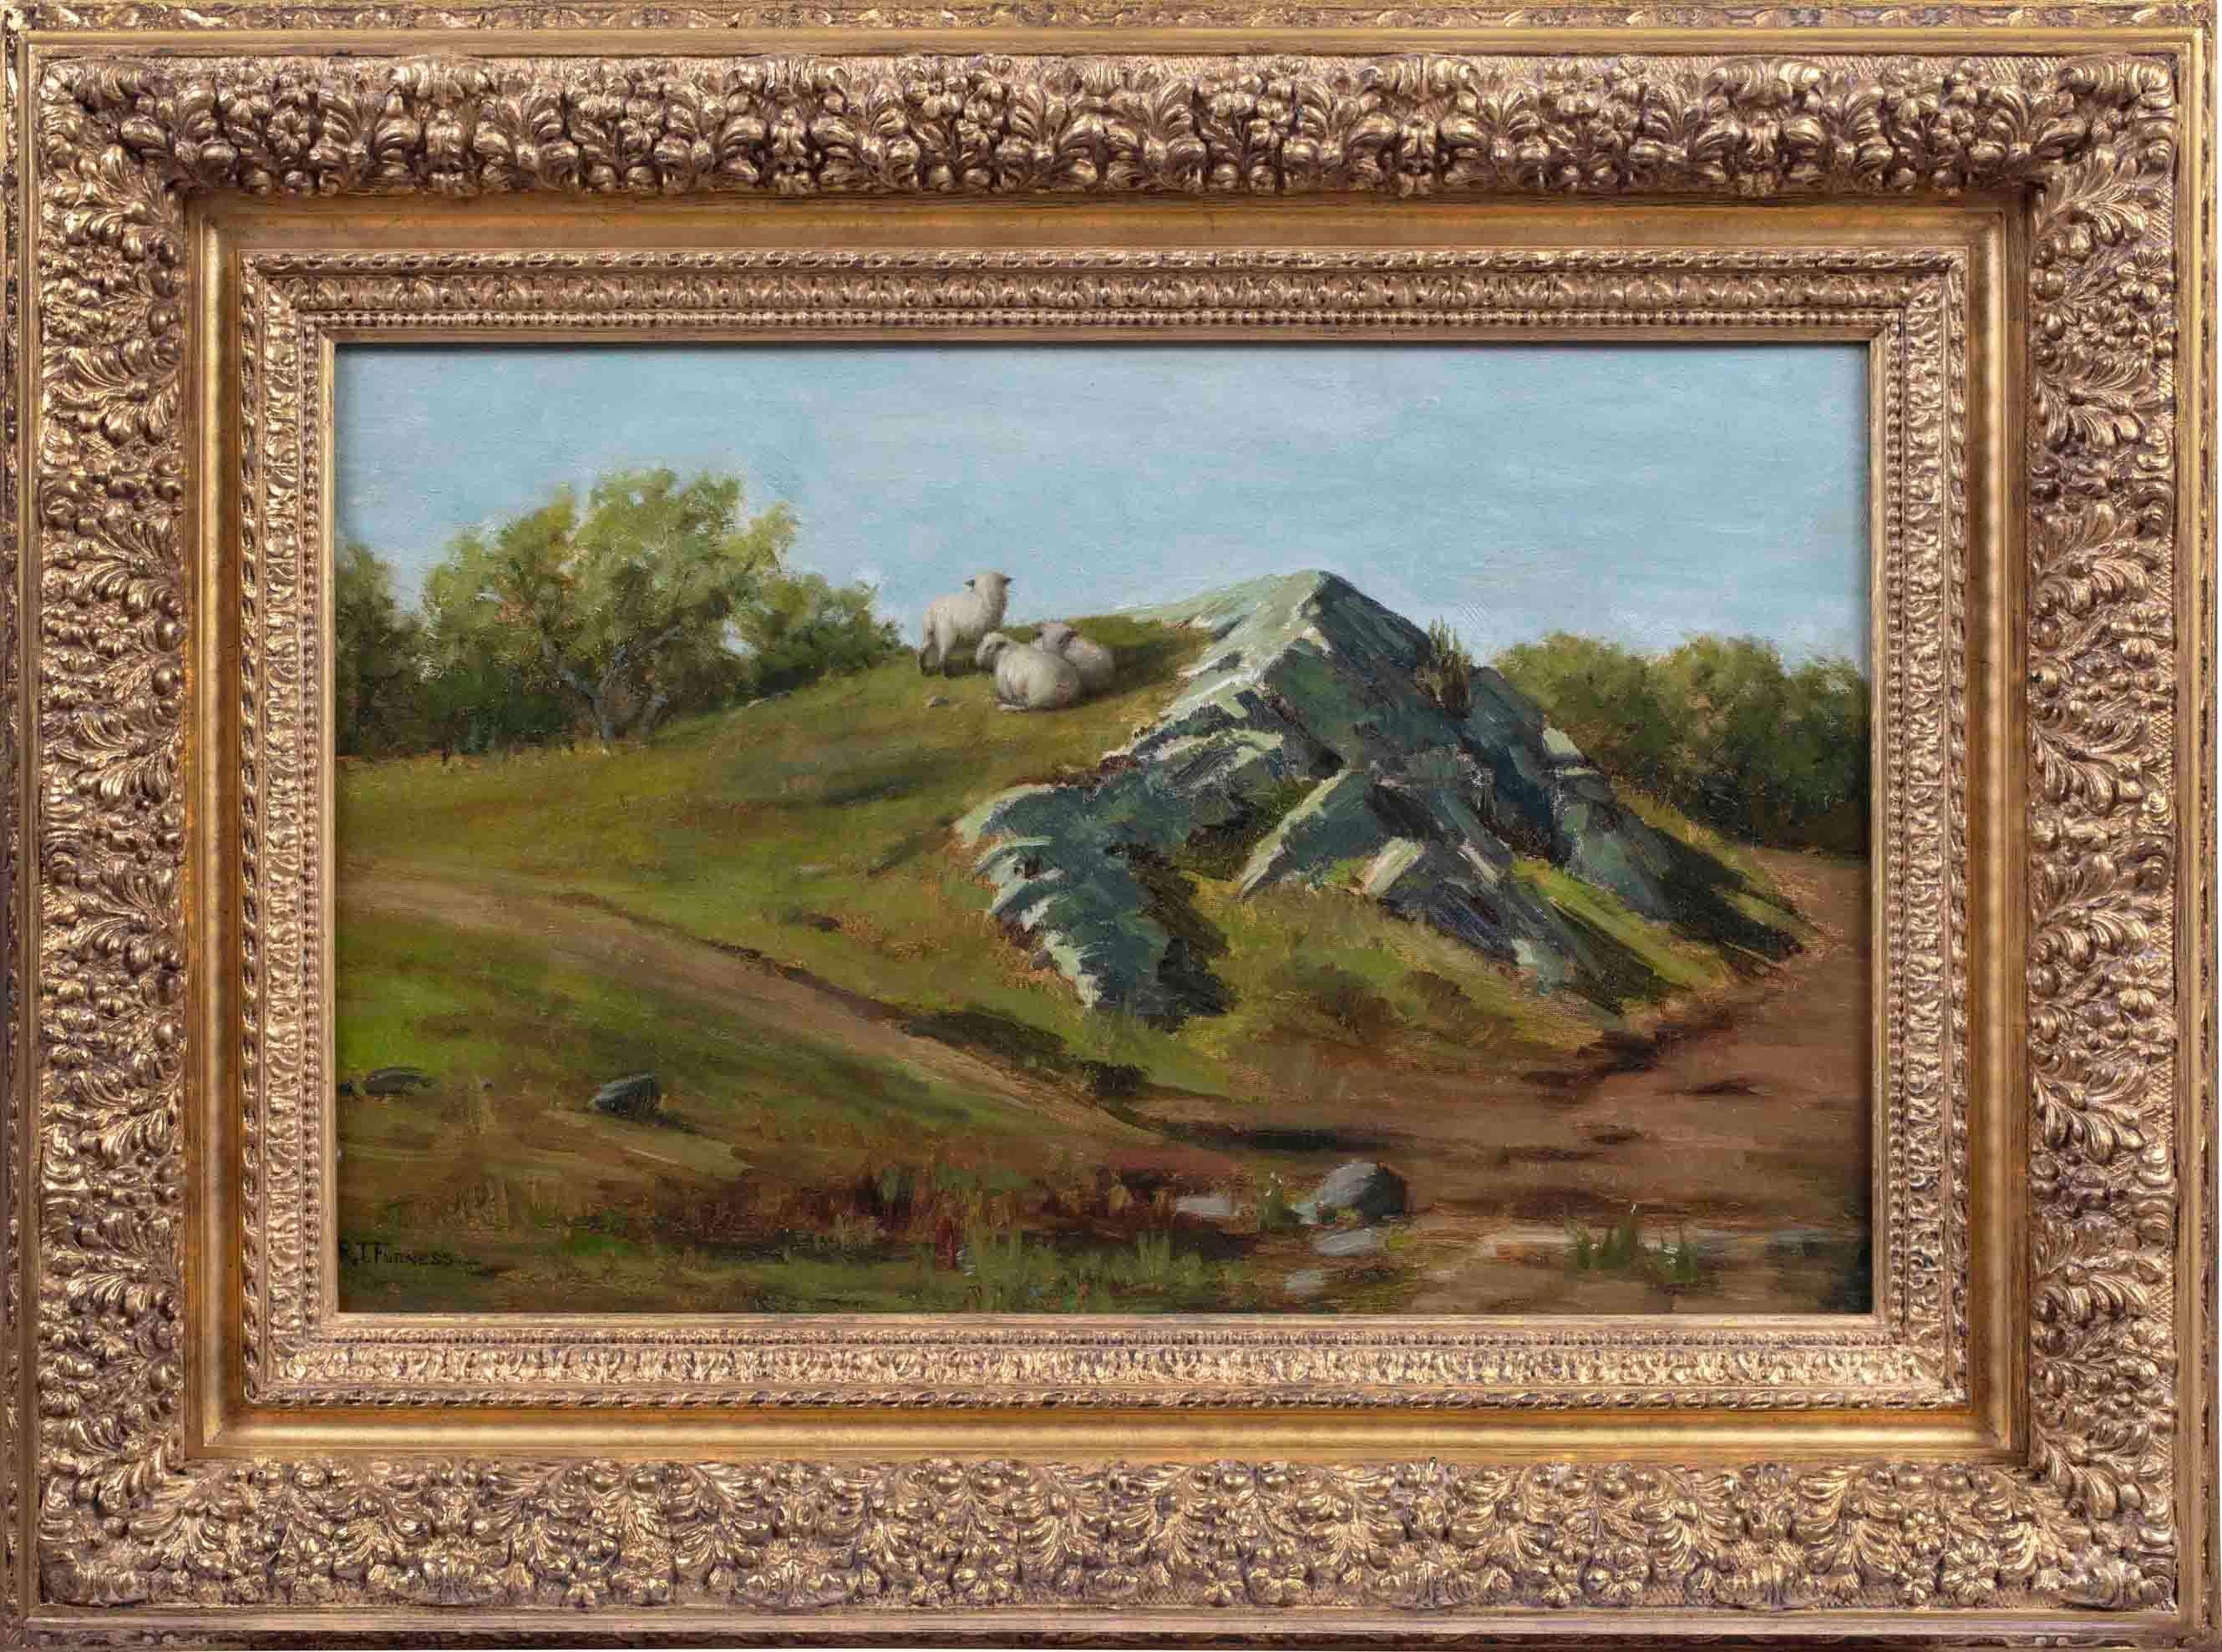 "At Pasture," by historic woman artist Rebekah T. Furness (1854-1937)  is oil on canvas. The charming scene captures sheep grazing on a green hillside beside a rocky outcropping. The work measures 15 x 25 inches and is signed by the artist at the